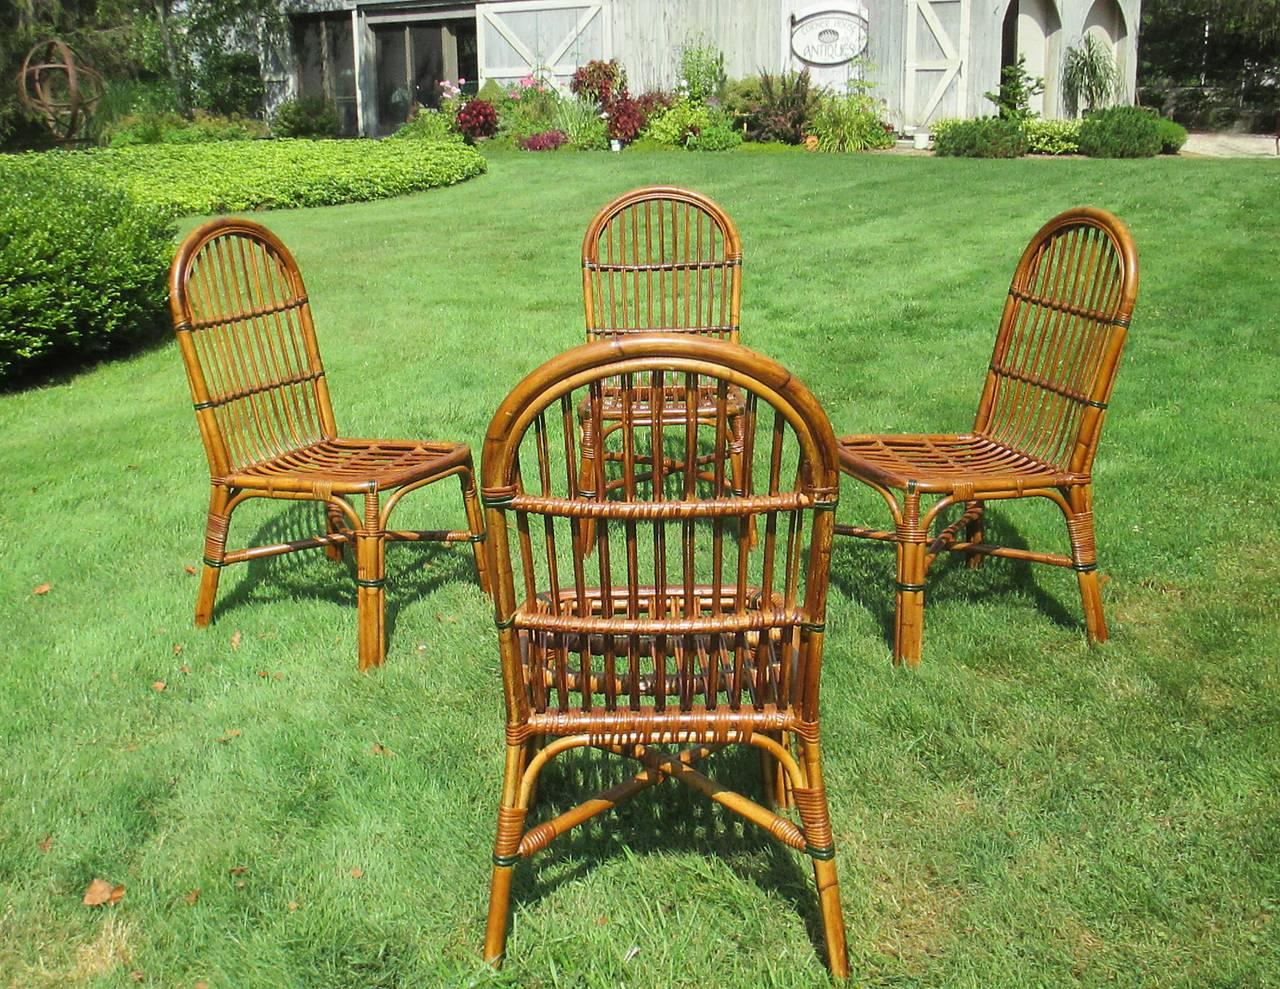 Five-Piece Stick Wicker Dining Set In Excellent Condition For Sale In Sheffield, MA